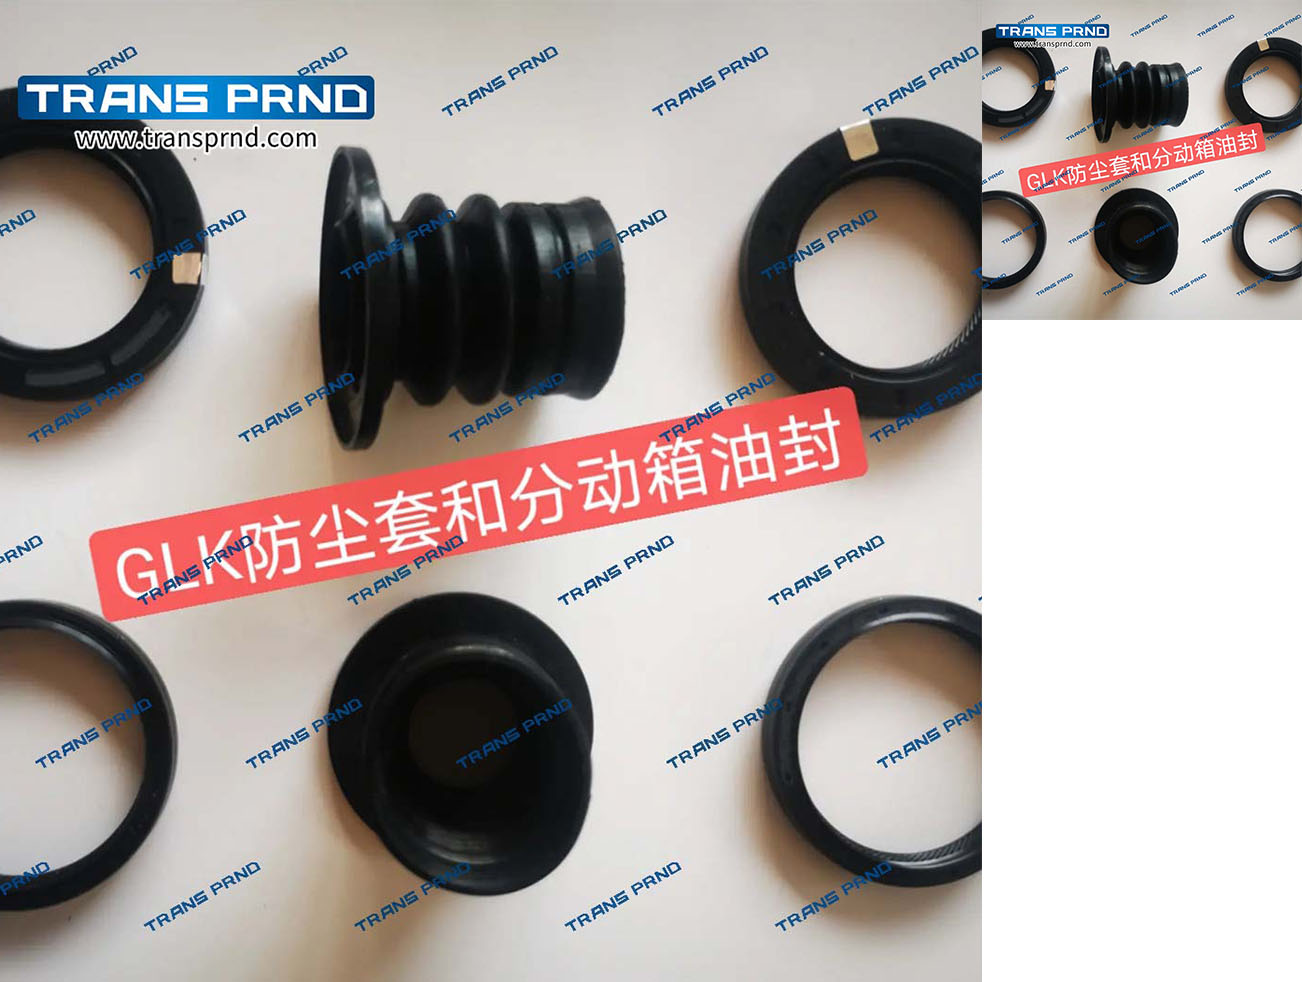 722.9 Transfer box oil seal and drive shaft dust cover 分动箱油封及传动轴防尘套